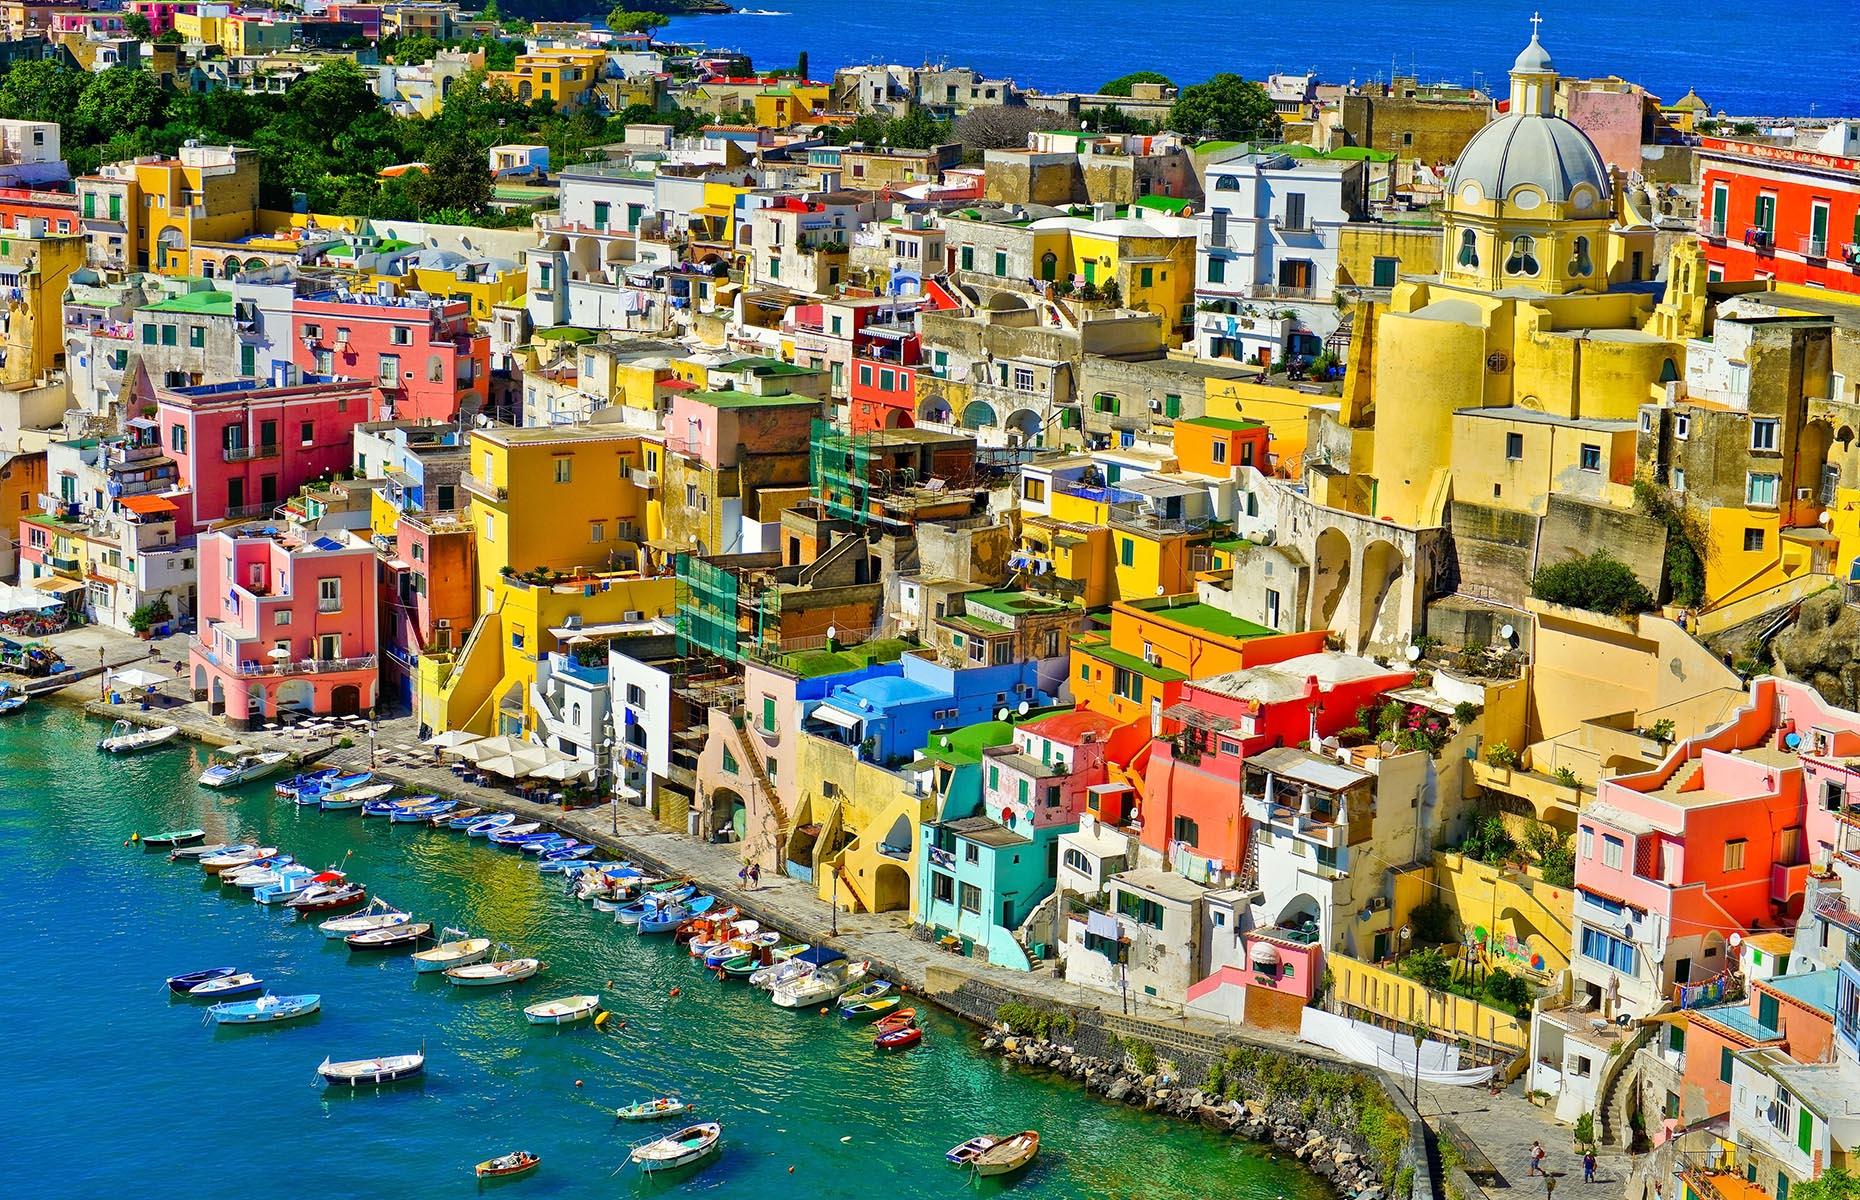 Slide 41 of 41: The town of Procida spans the whole island from which it gets its name. It’s the Bay of Naples’ smallest and sweetest island, much quieter than neighboring islands, such as Capri. Littering the seaside are houses drenched in dazzling shades of pink, blue, yellow and more, their peeling paintwork adding to the effortless Italian charm. Now take a look at the world's most colorful natural wonders